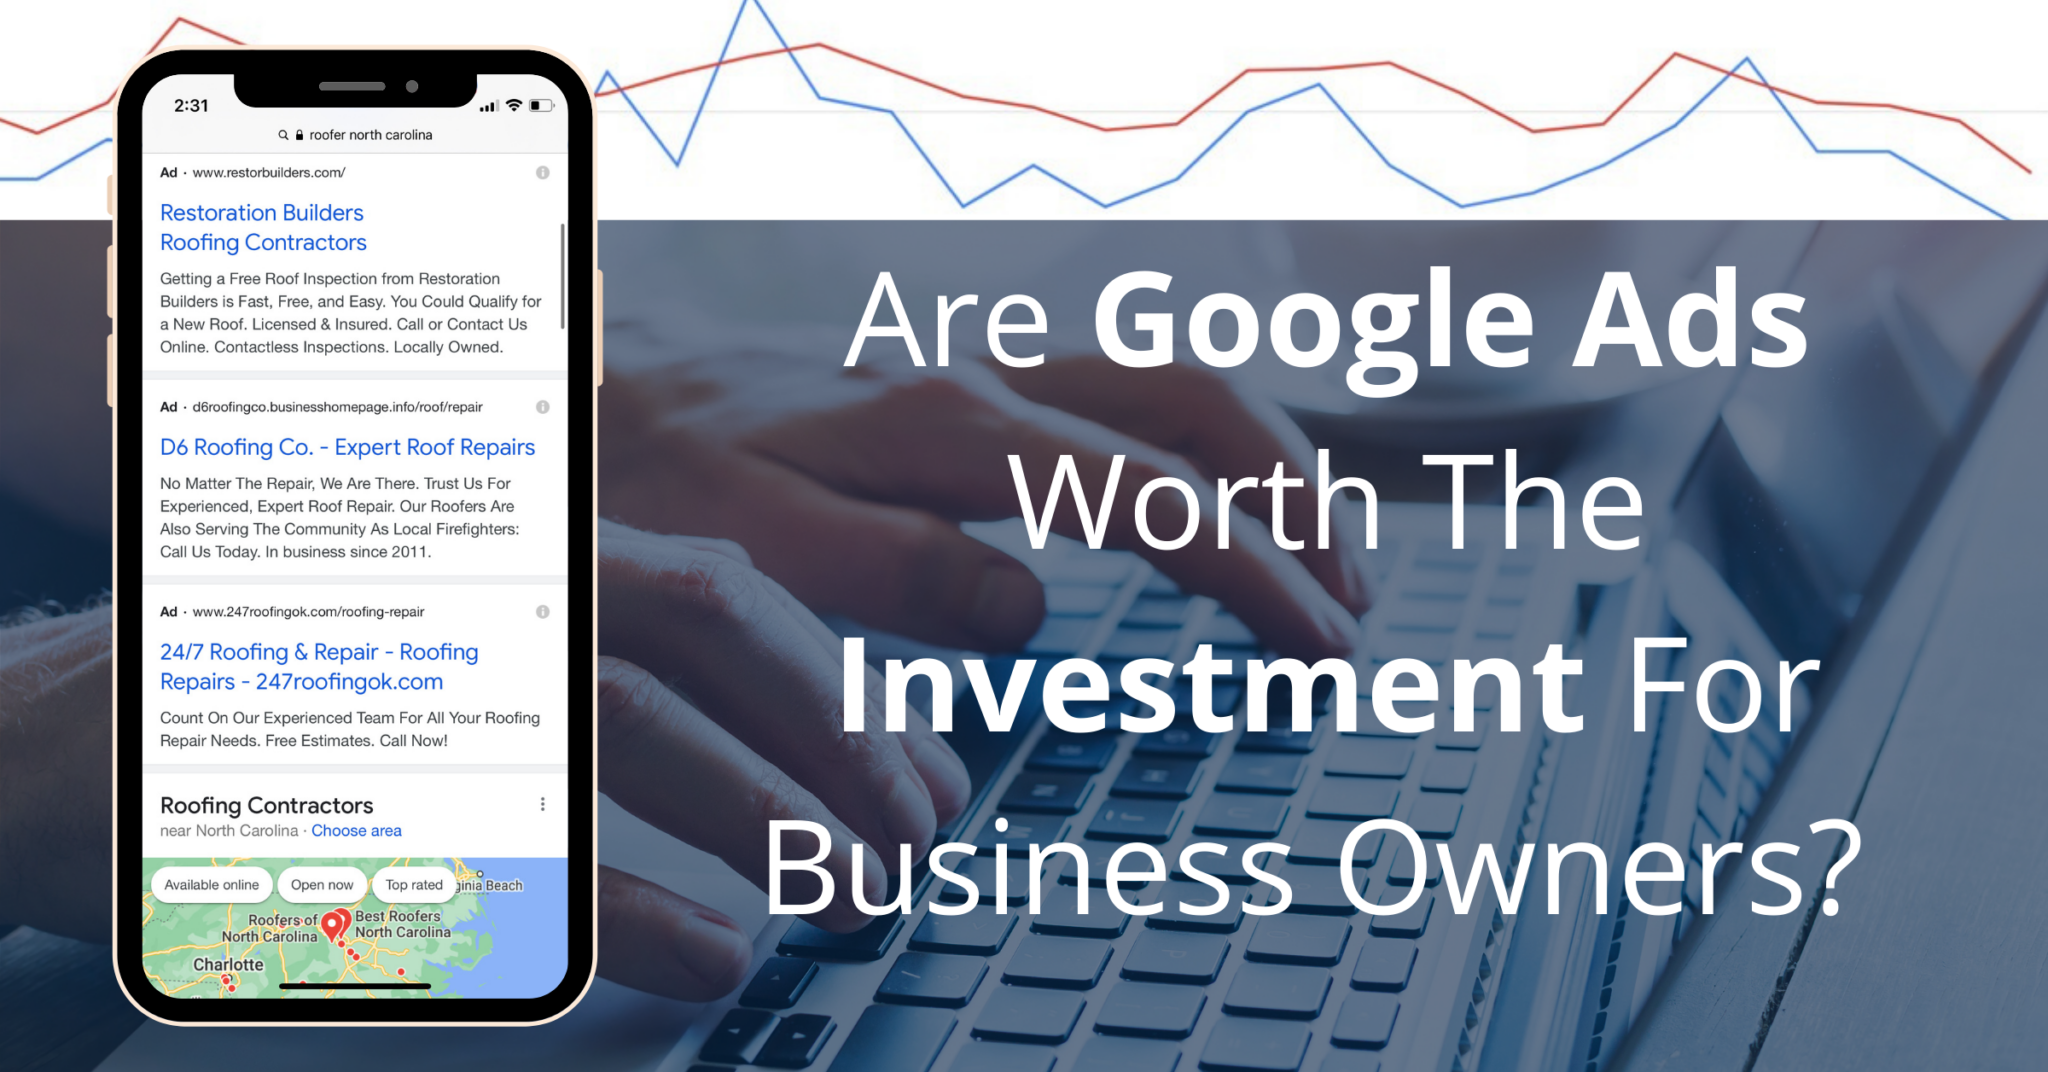 Are Google Ads Worth The Investment For Business Owners